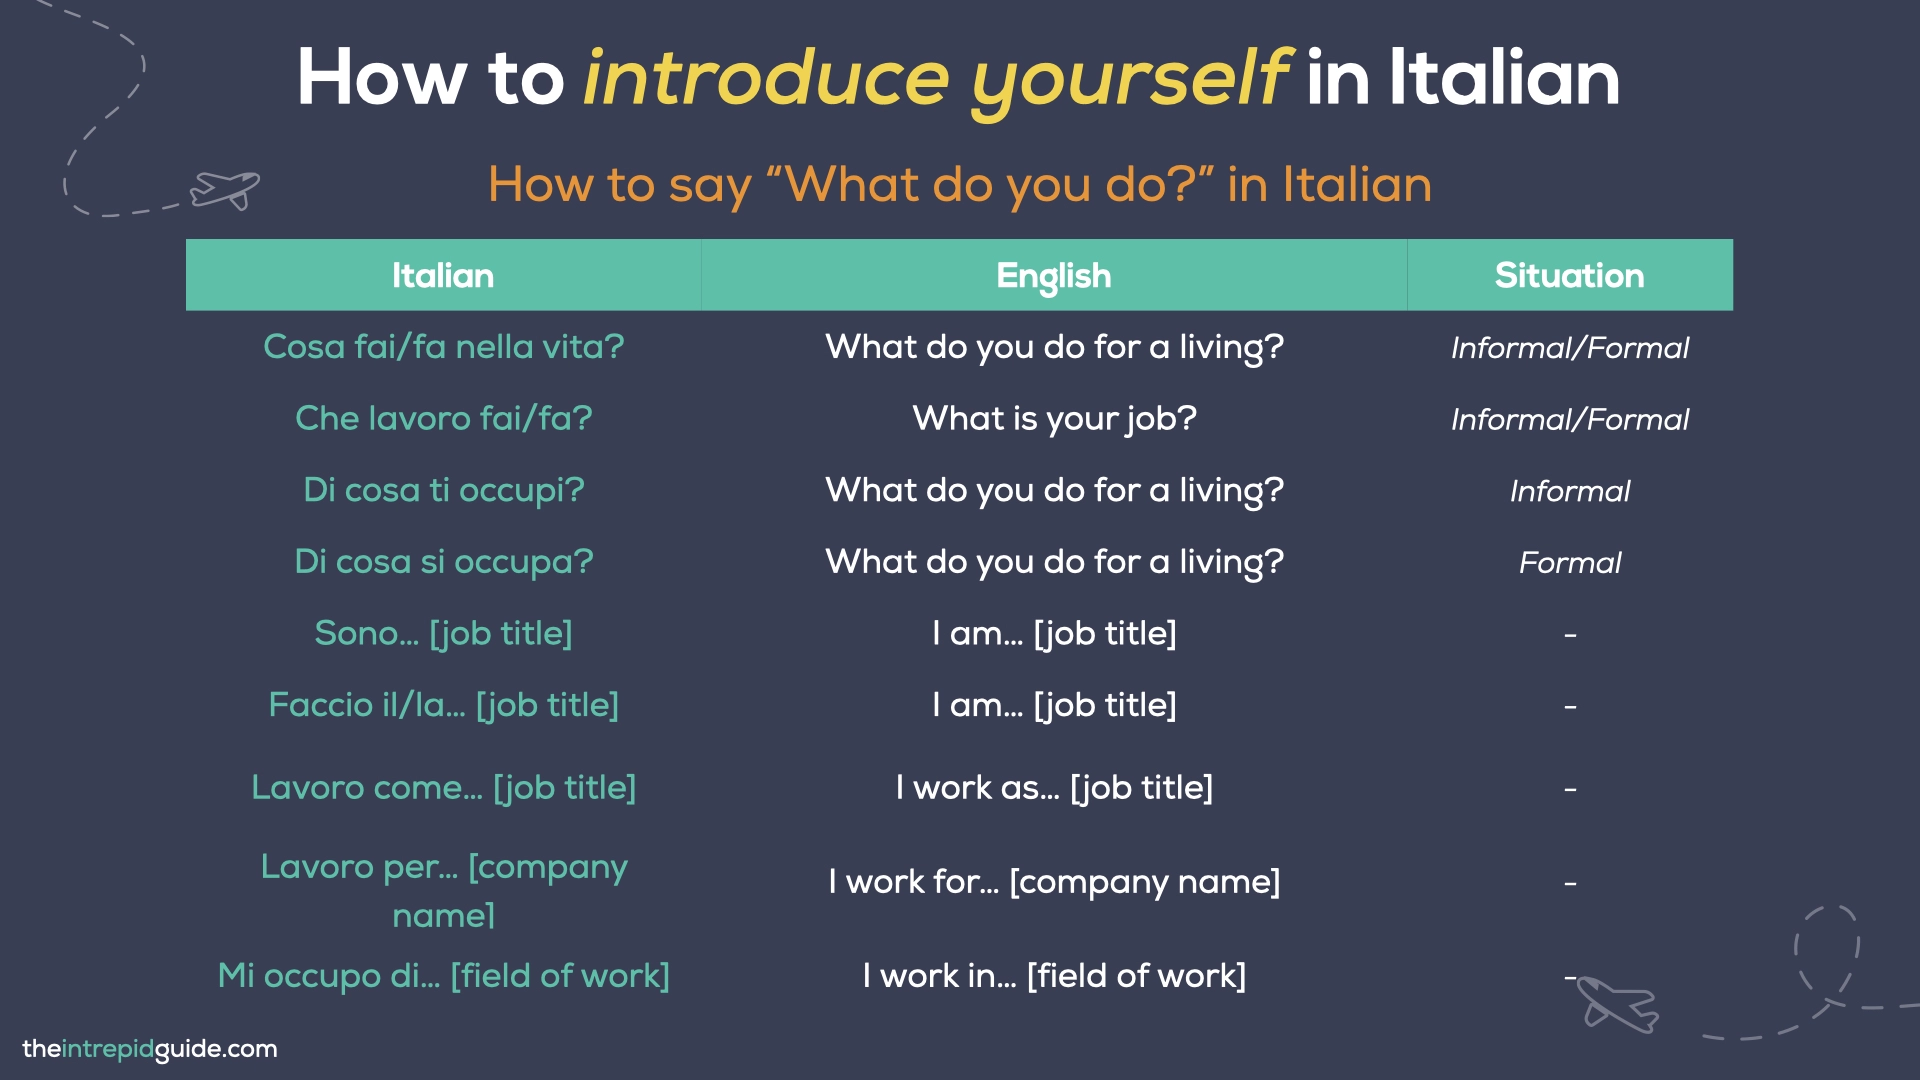 How to introduce yourself in Italian - How to say What do you do in Italian